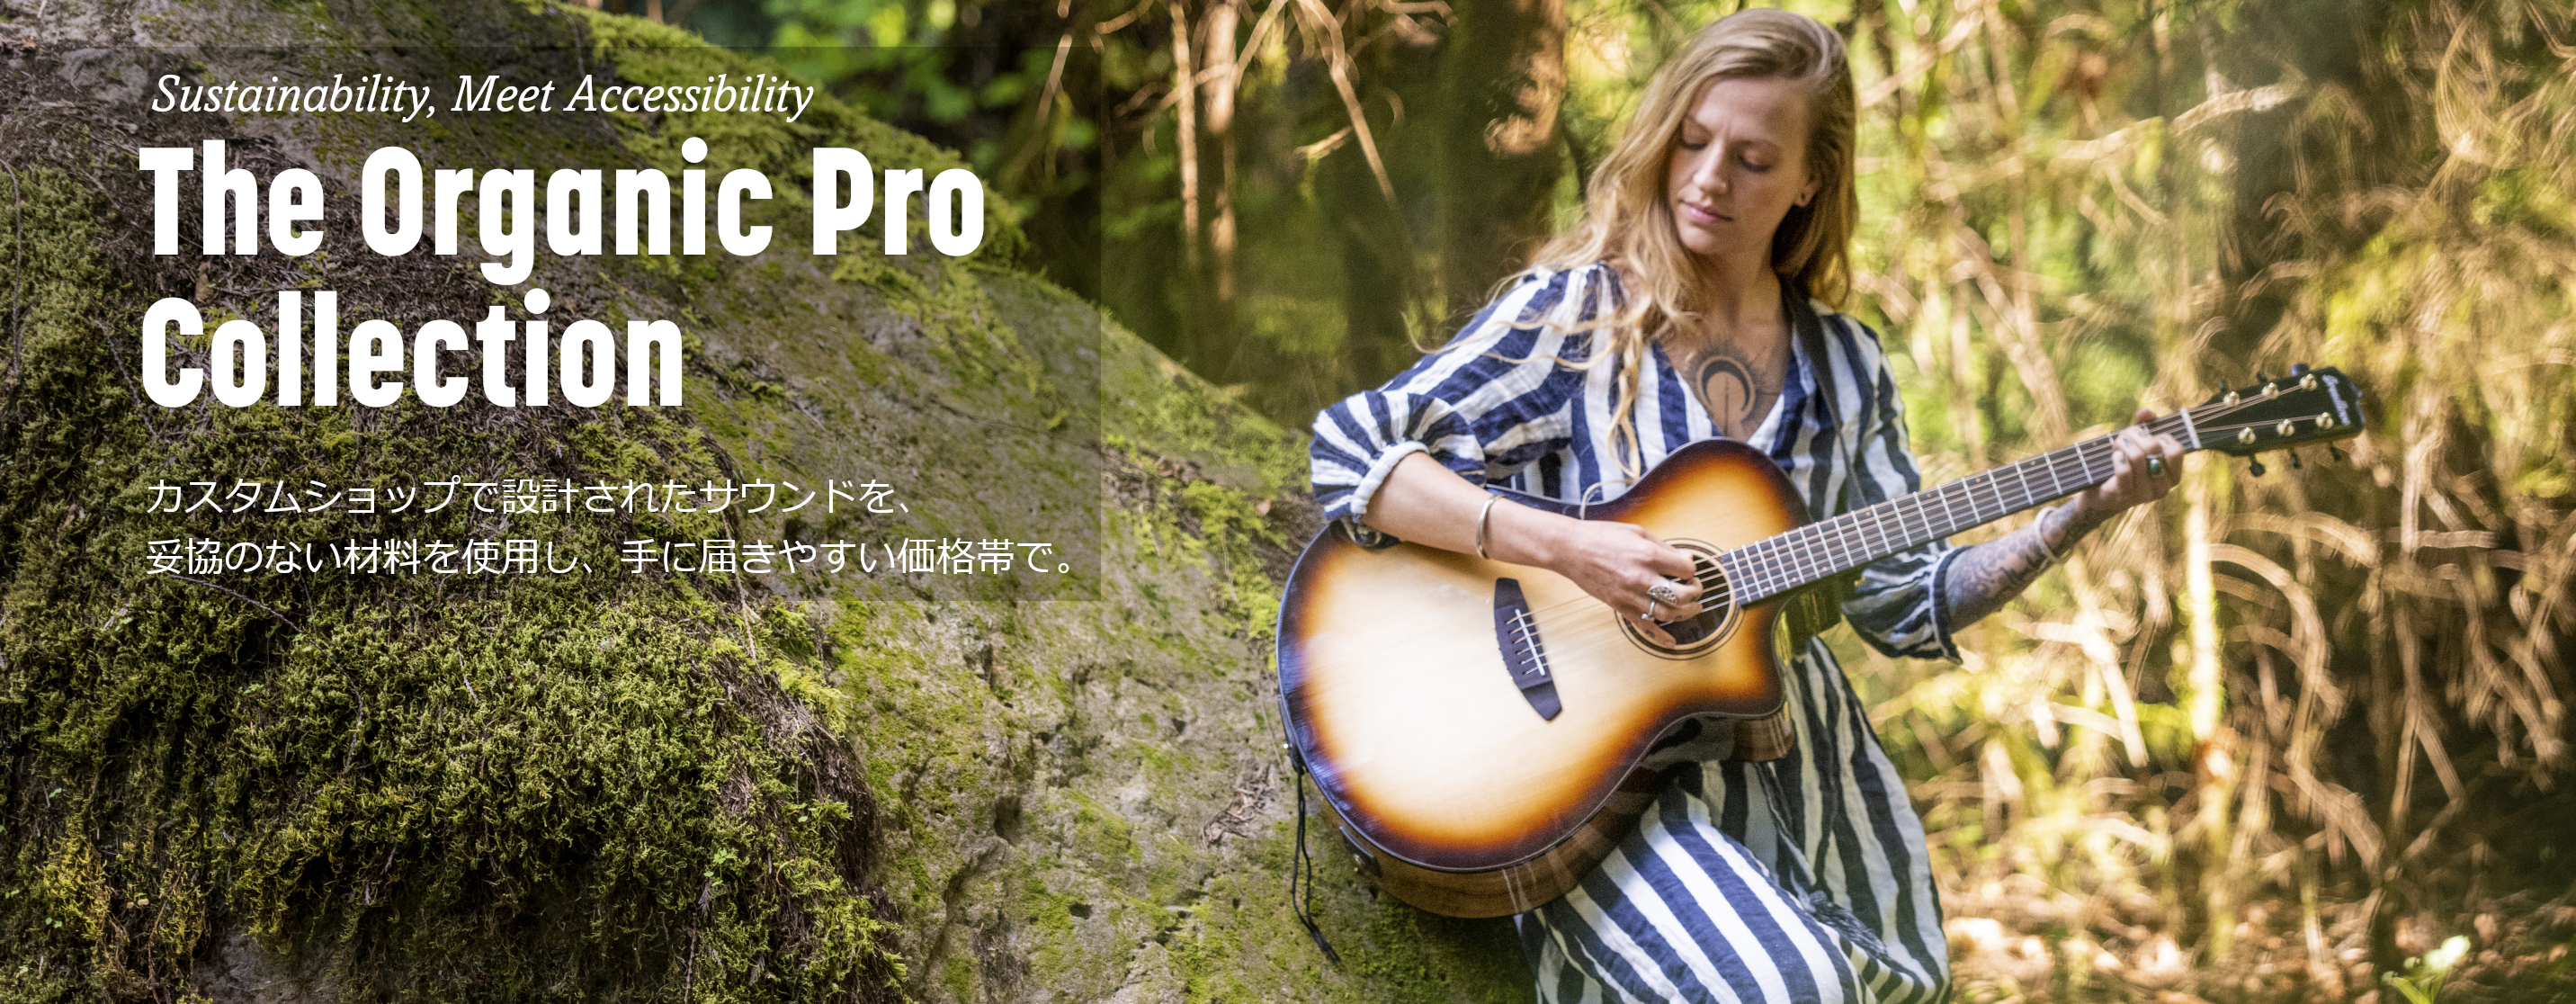 The Organic Pro Collection